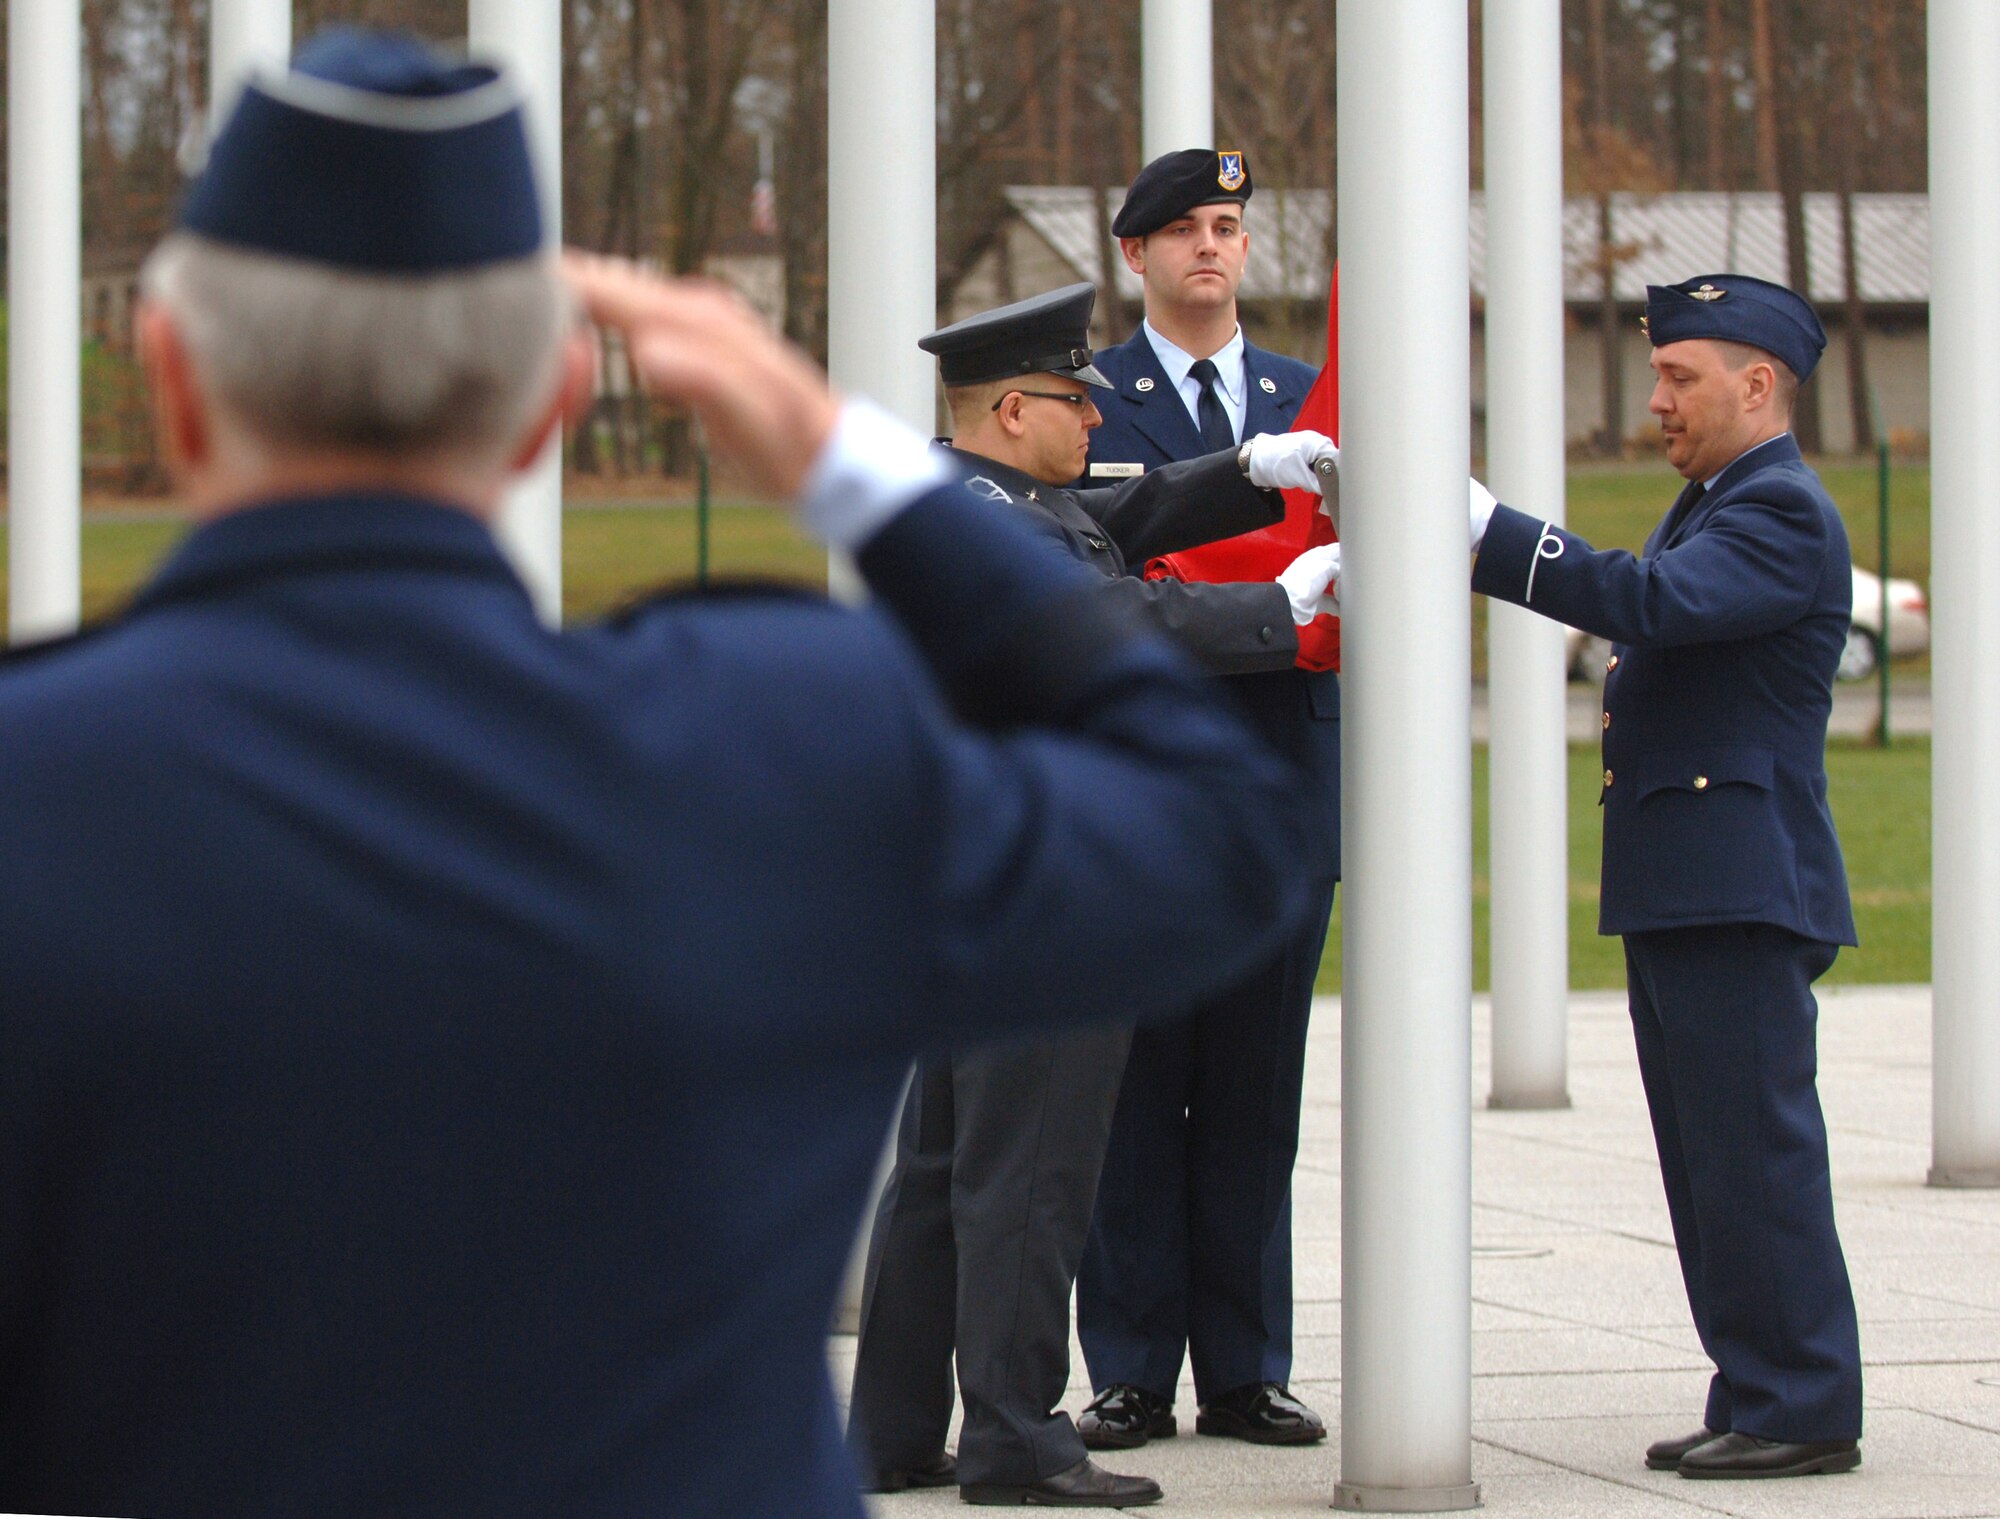 Gen. Roger A. Brady (foreground), commander of U.S. Air Forces in Europe and NATO Allied Air Component Command, salutes as (l-r) Polish air force Staff Sgt. Arek Sarkowski, U.S. Air Force Senior Airman Andrew Tucker and Belgian air force Adjutant Philip Van Huyck hoist the Albanian flag during a ceremony April 8 at Ramstein Air Base, Germany, to recognize the accession of Croatia and Albania as the 27th and 28th members of NATO. (Defense Department photo/Master Sgt. Scott Wagers)